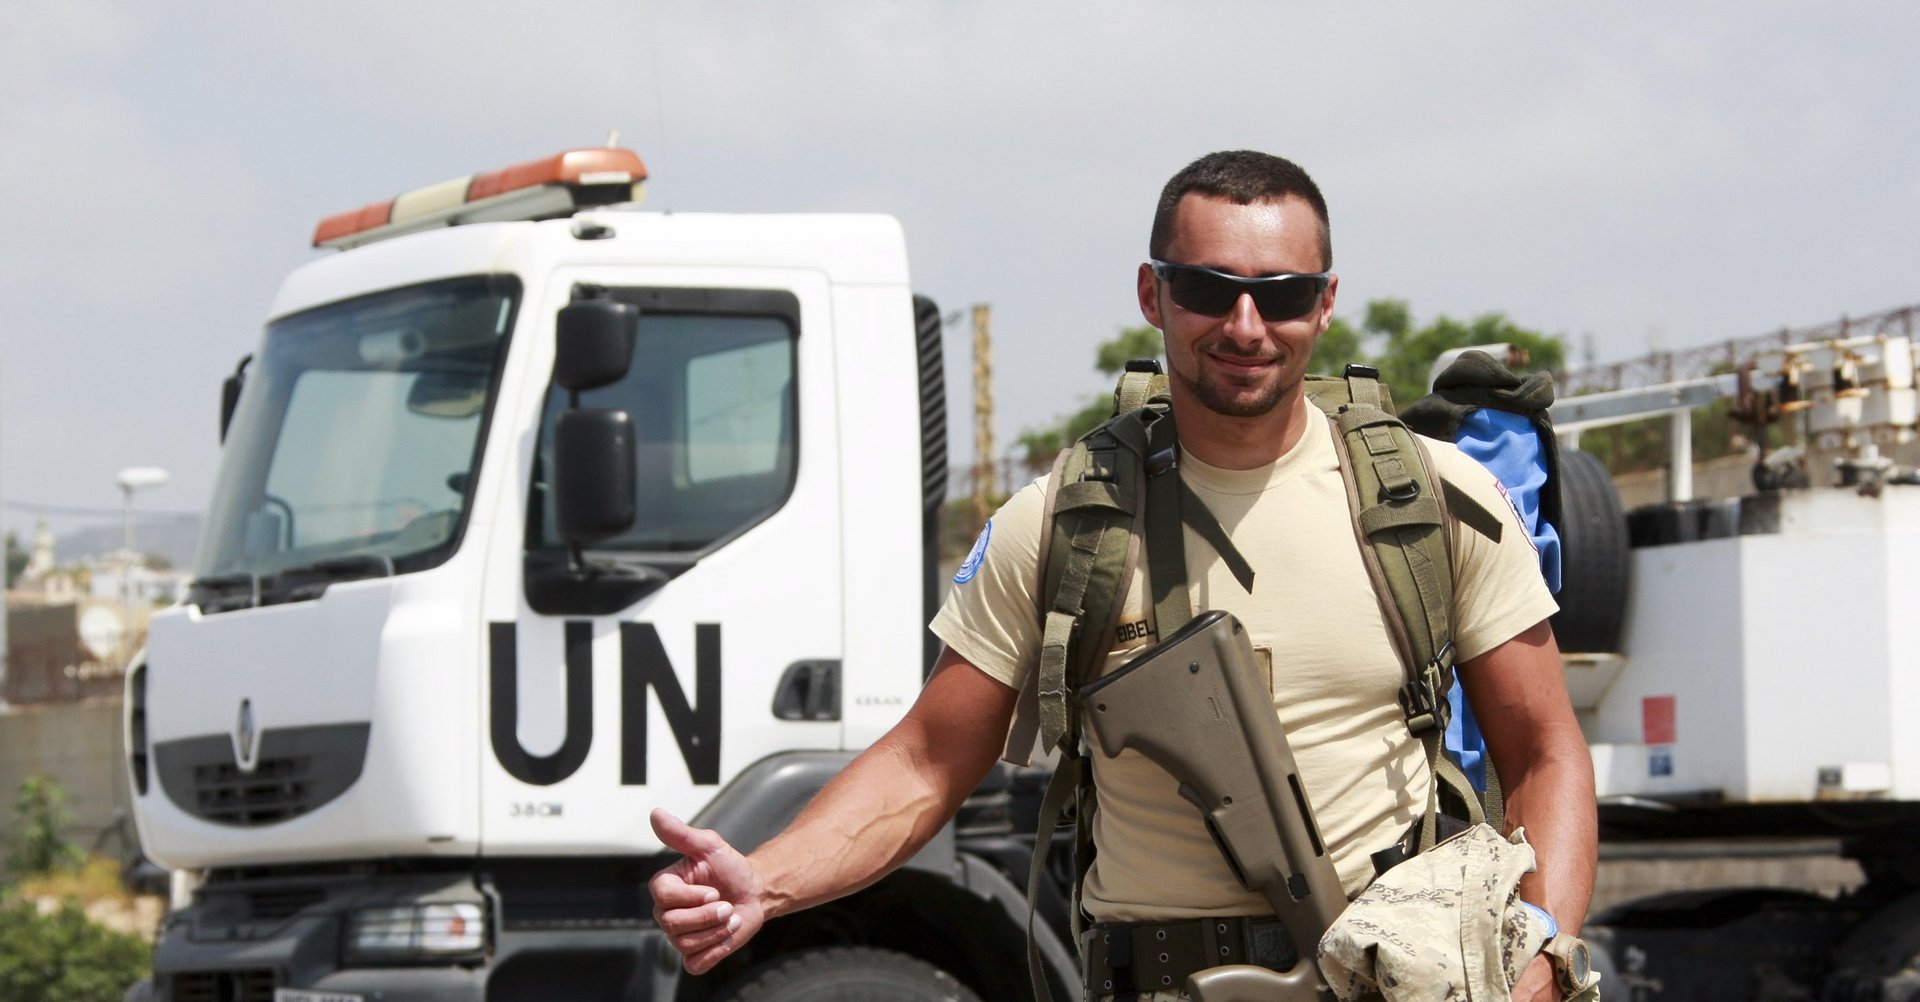 An Austrian United Nations soldier in Lebanon.